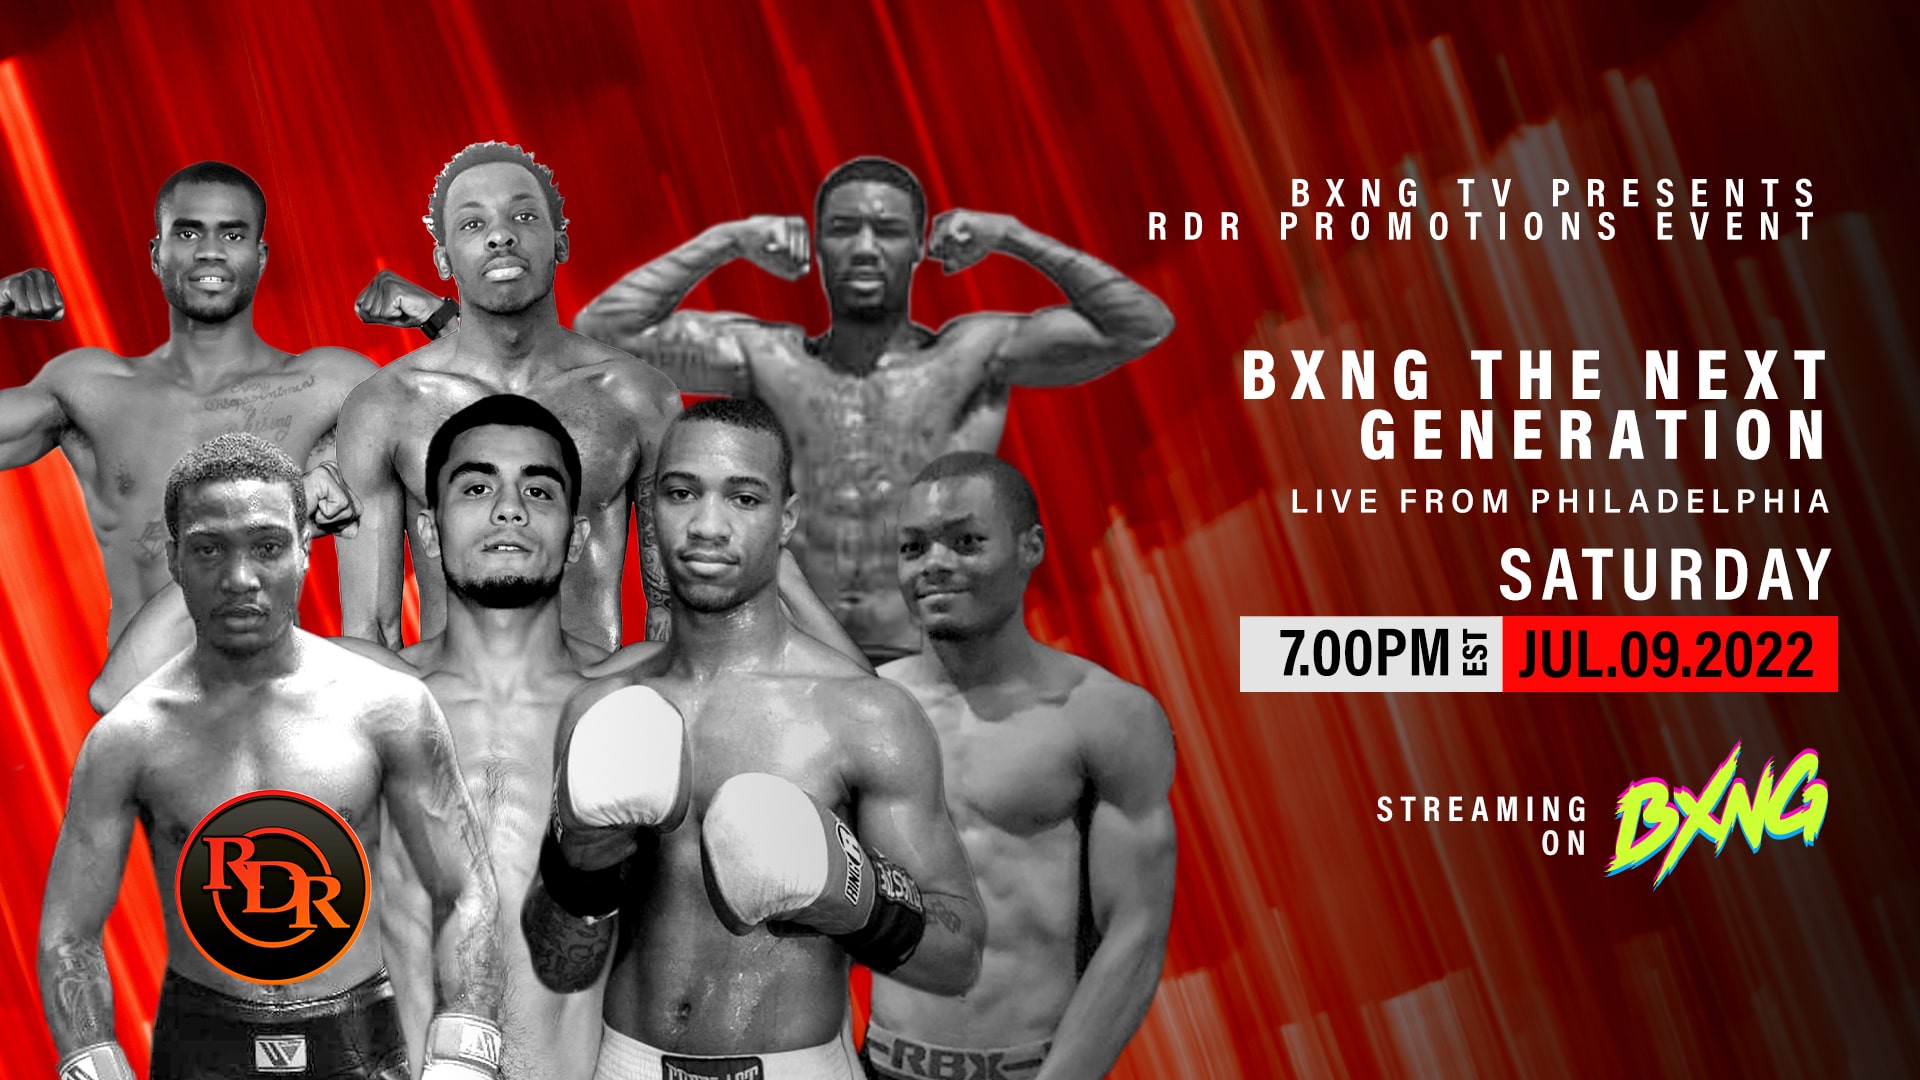 BXNG TV Presents RDR Boxing Event Live Stream 07/09/22